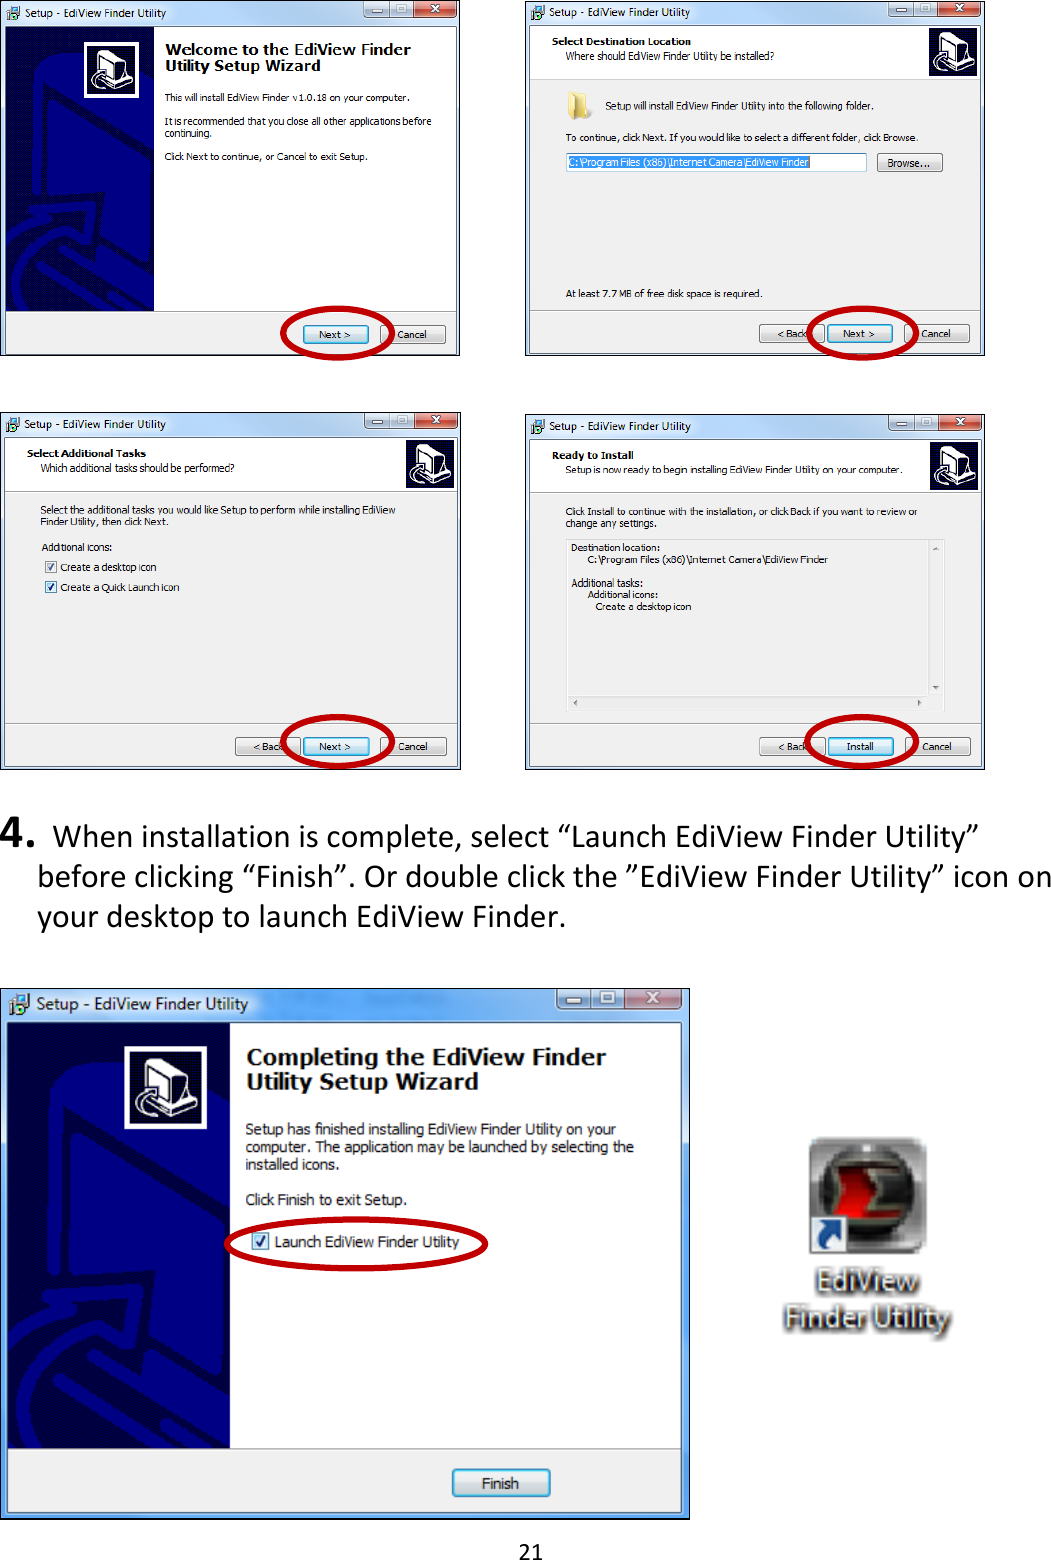 21         4.   When installation is complete, select “Launch EdiView Finder Utility” before clicking “Finish”. Or double click the ”EdiView Finder Utility” icon on your desktop to launch EdiView Finder.   